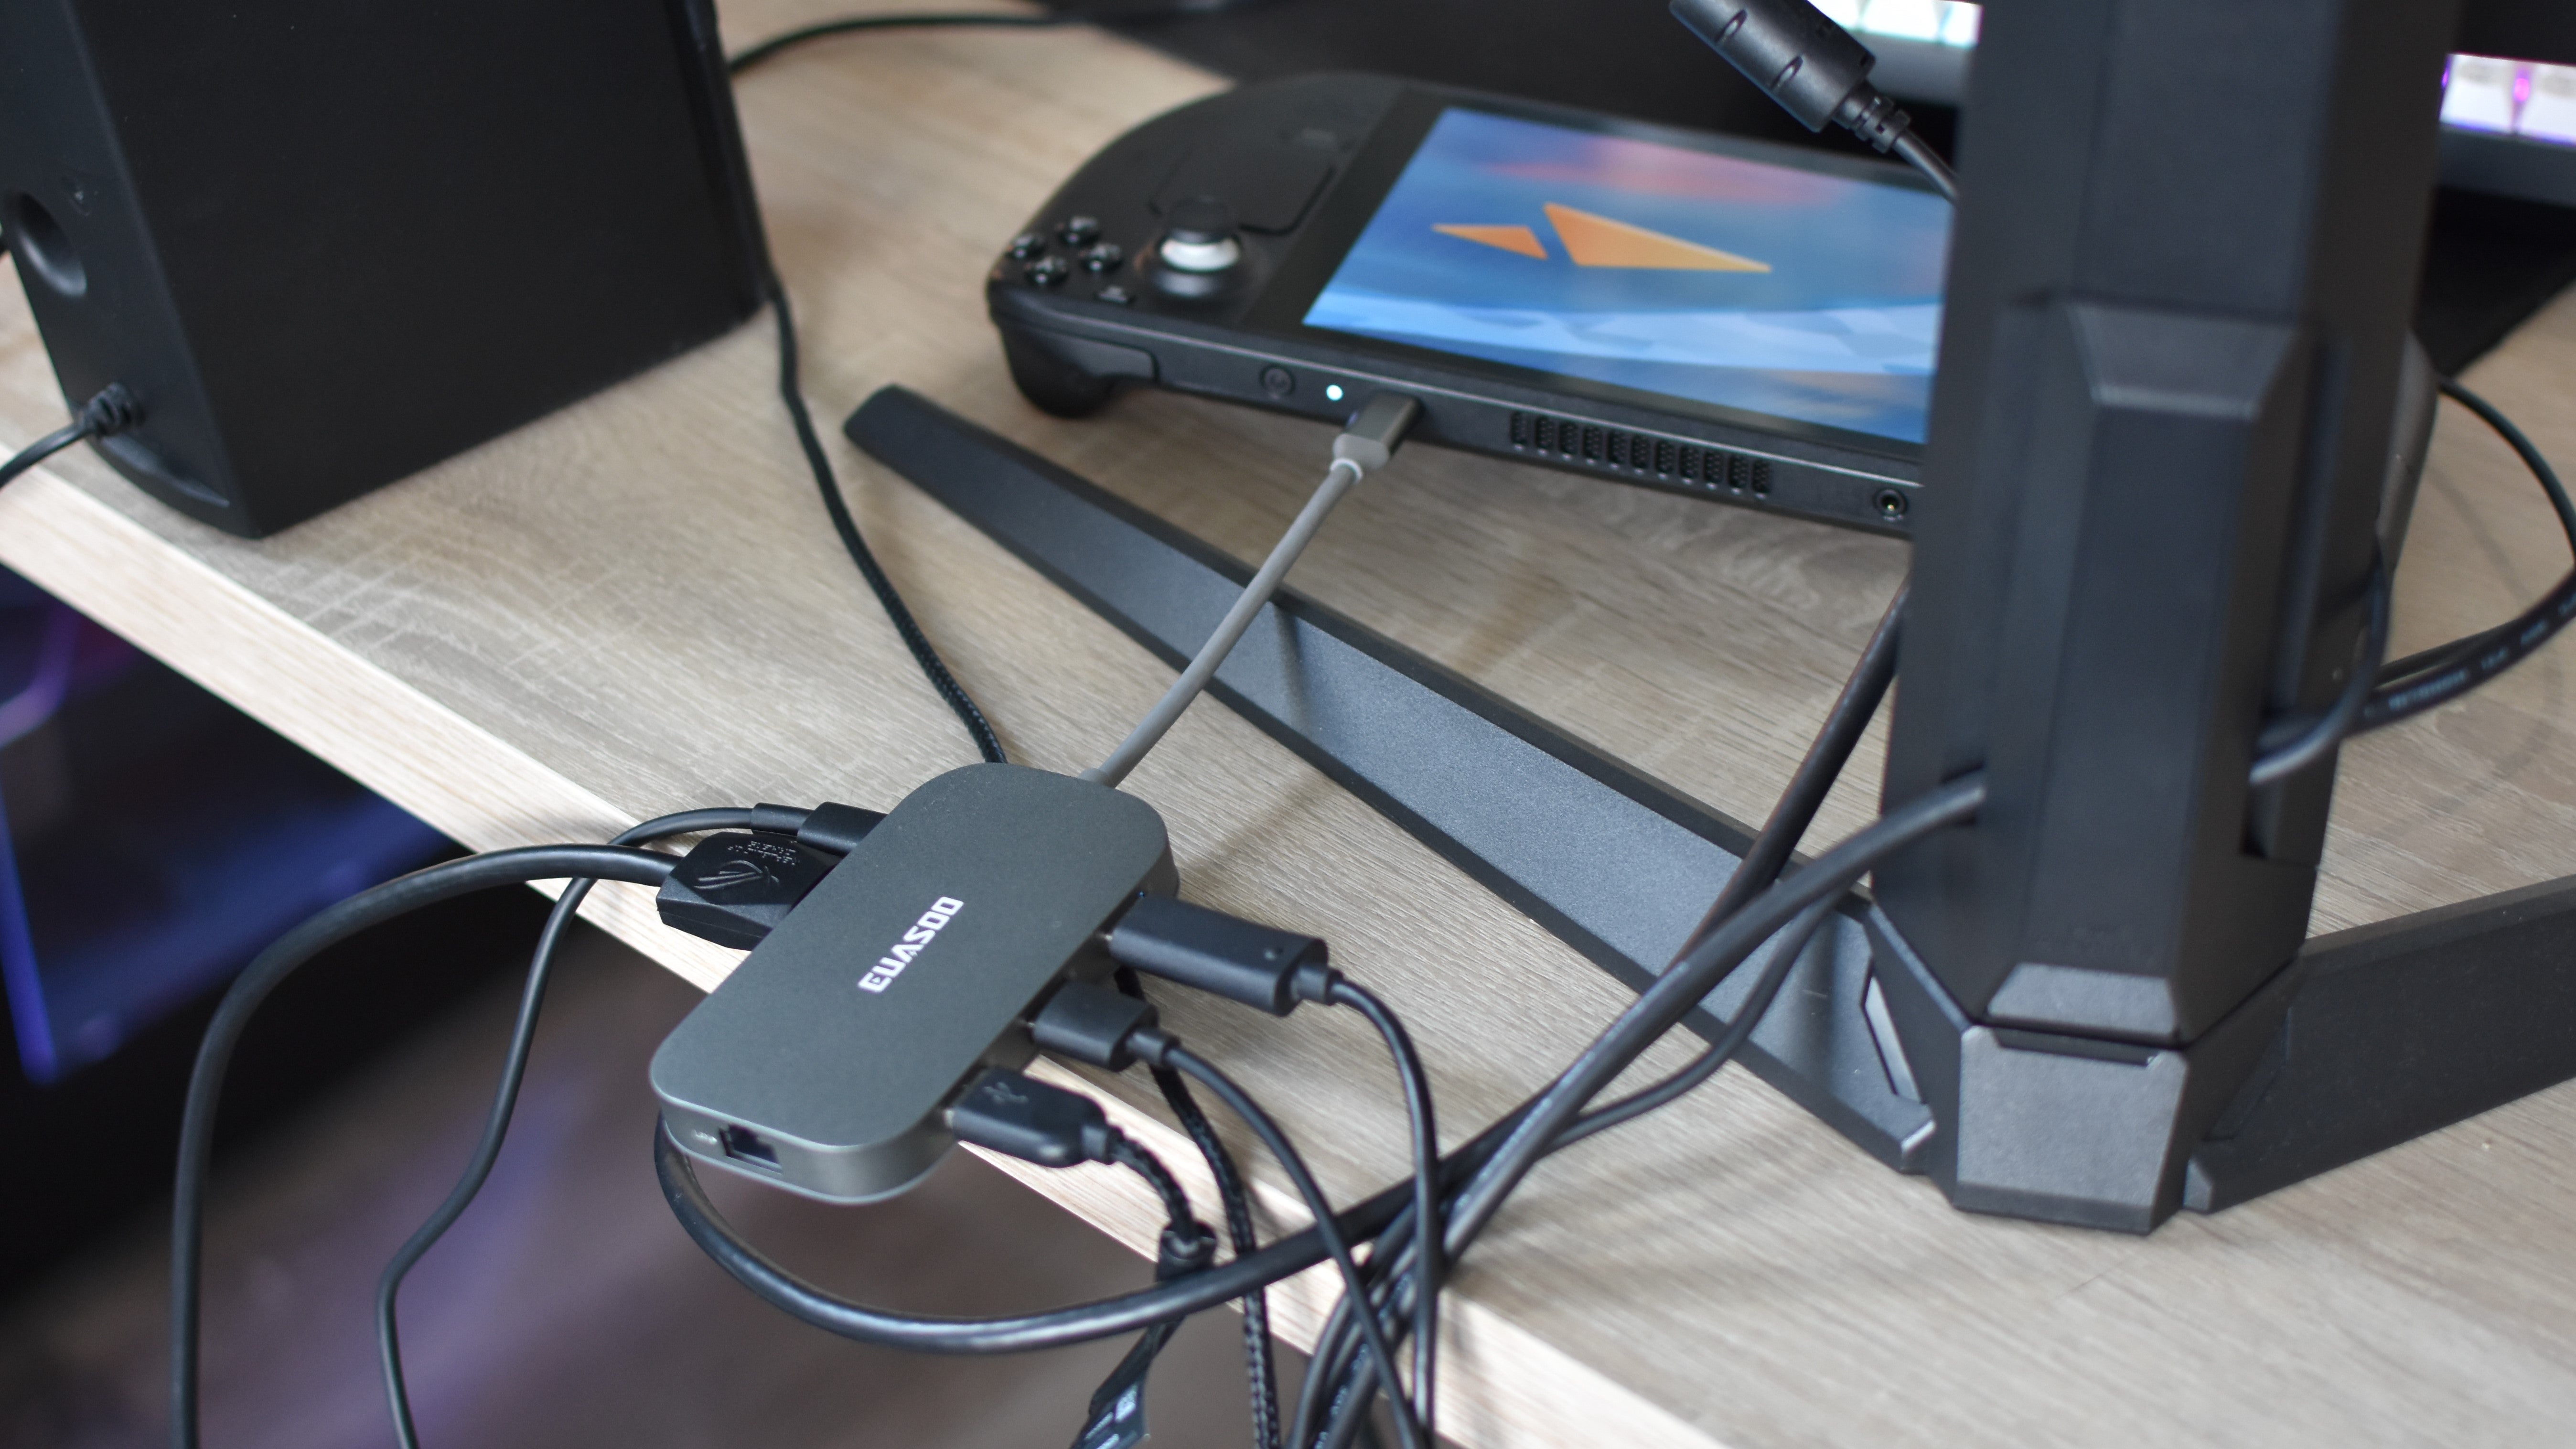 A USB-C hub connecting various peripherals, and a desktop monitor, to the Steam Deck.